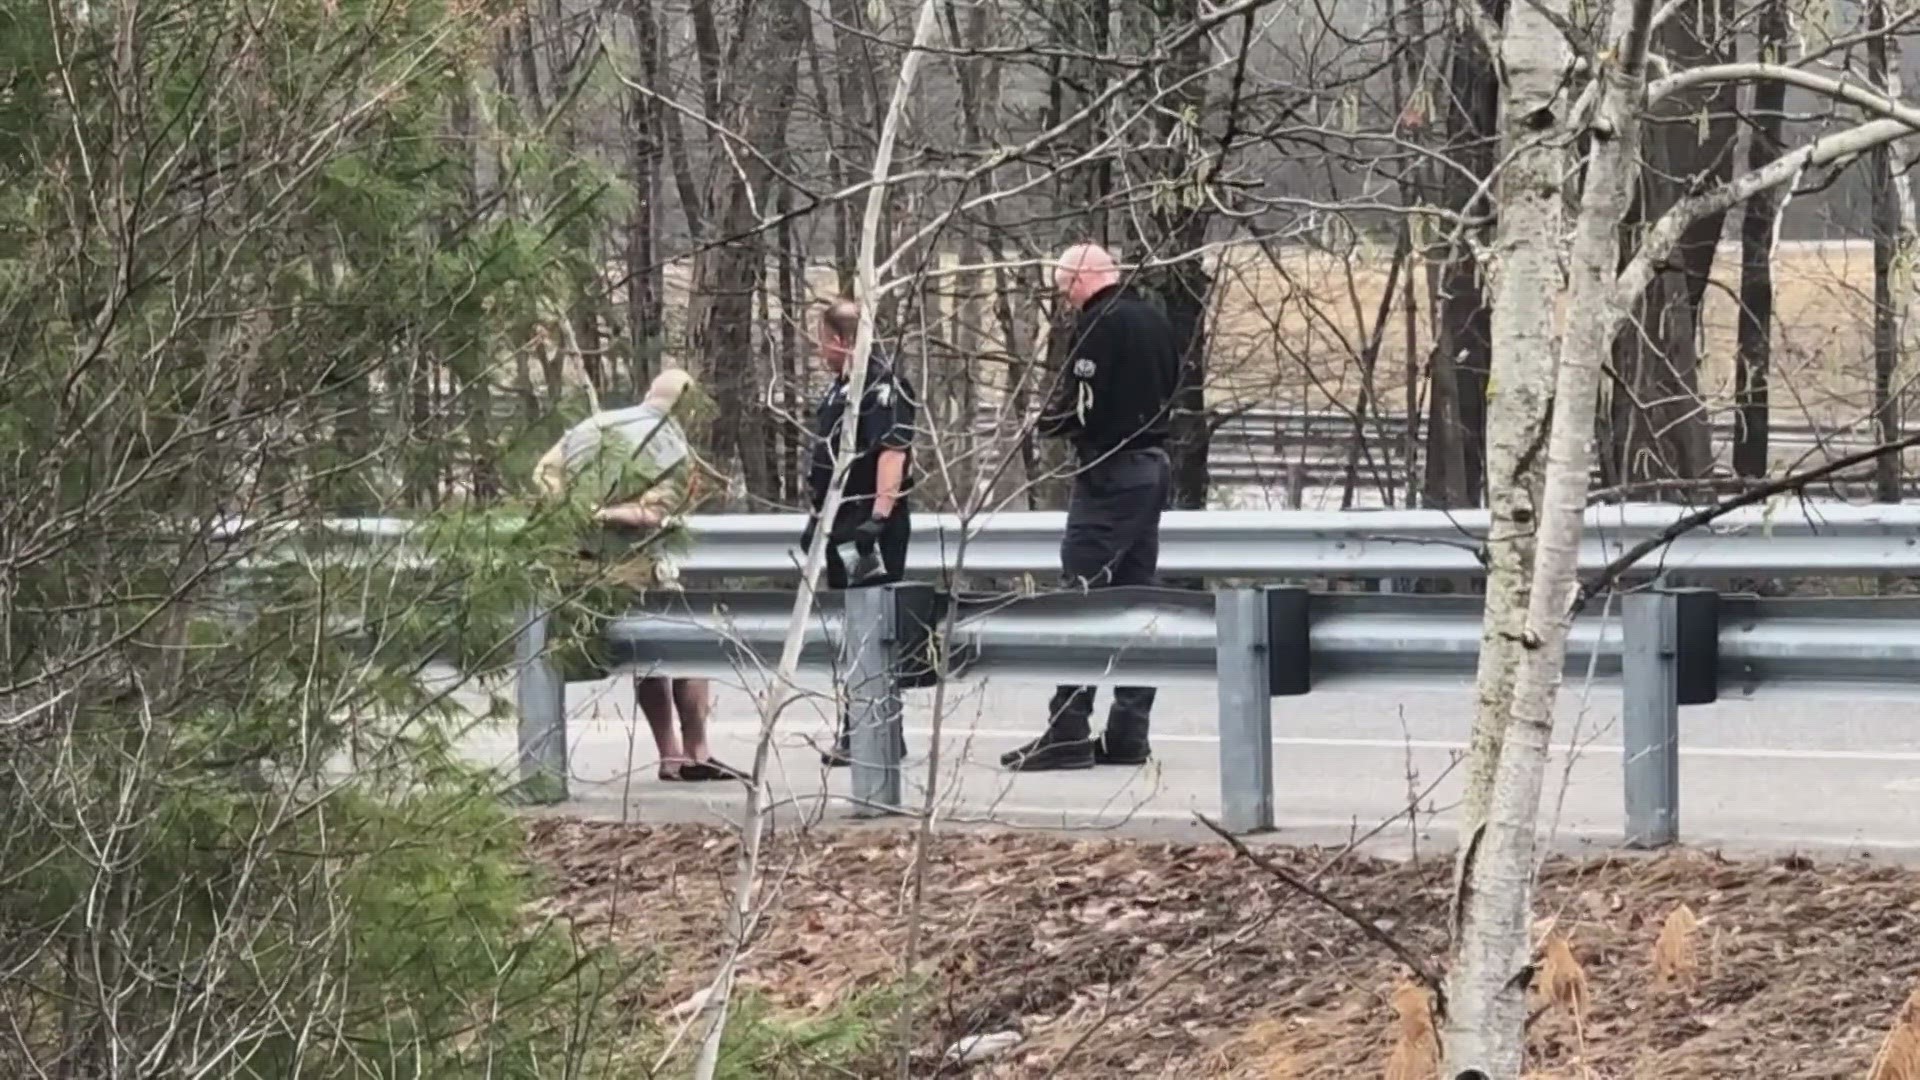 A man was arrested after 4 bodies were found at a home in Bowdoin, and 3 people were injured in a shooting on I-295 in Yarmouth believed to be related, police say.